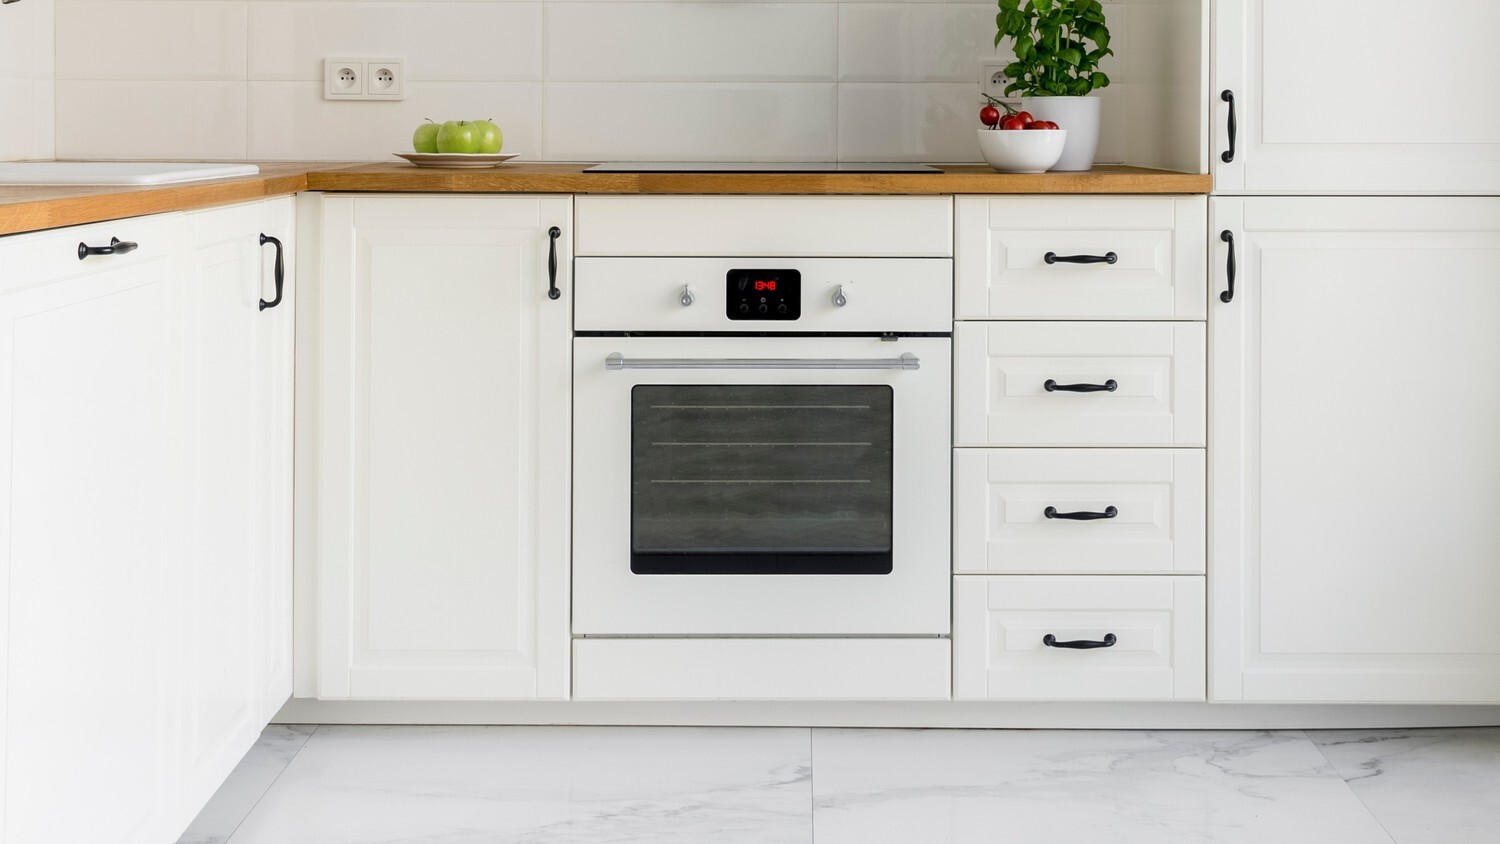 A picture of a white oven in a bright and clean kitchen.